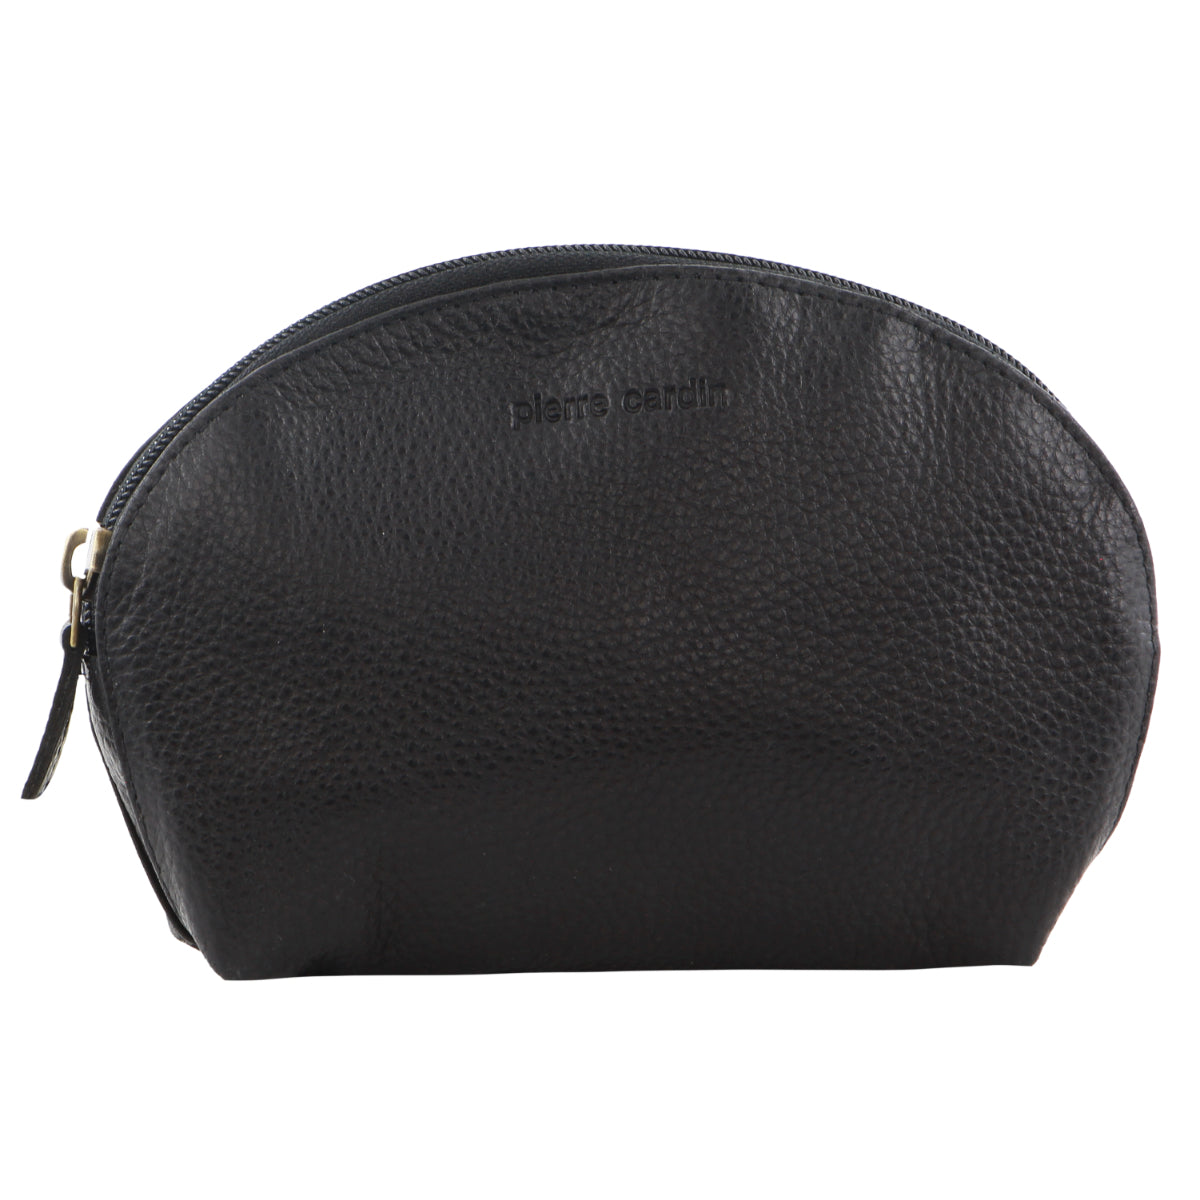 Pierre Cardin Leather Ladies Coin Purse in Black